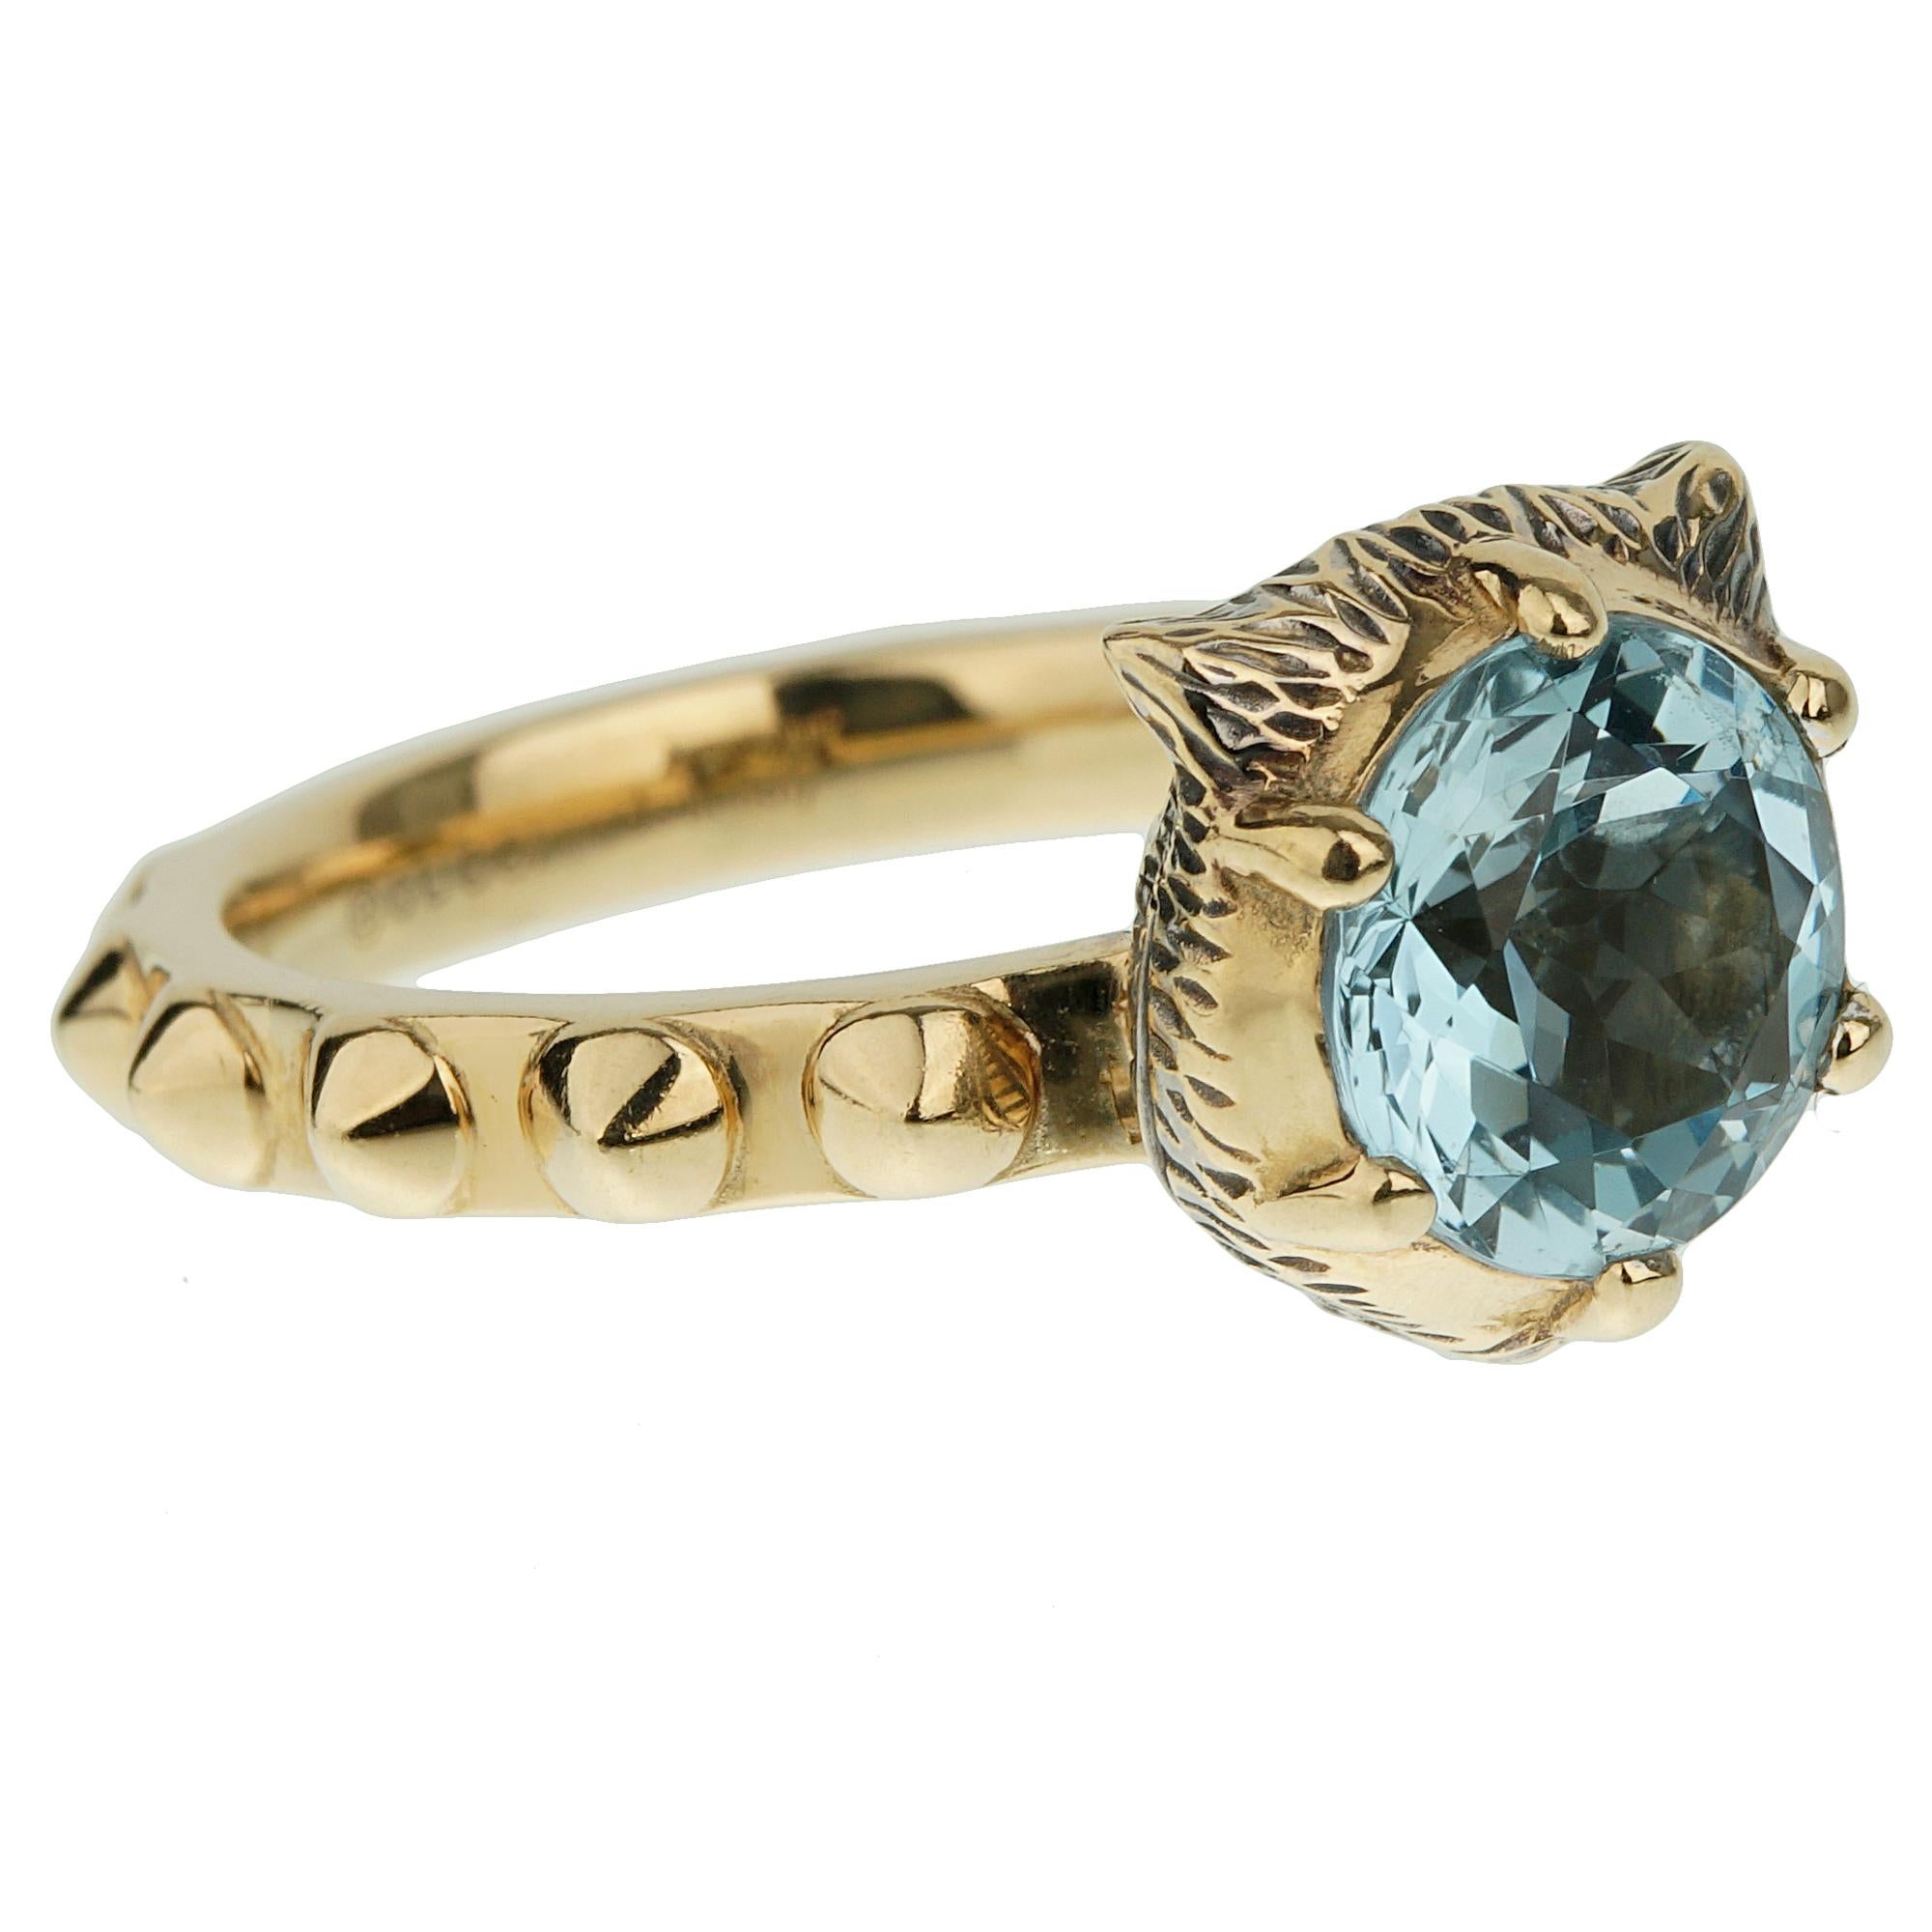 A stunning Gucci ring from the Le Marche Des Merveilles collection showcasing a 1.5ct blue topaz, on the reverse side is a Tiger adorned with 2 round brilliant cut diamonds set in 18k yellow gold.